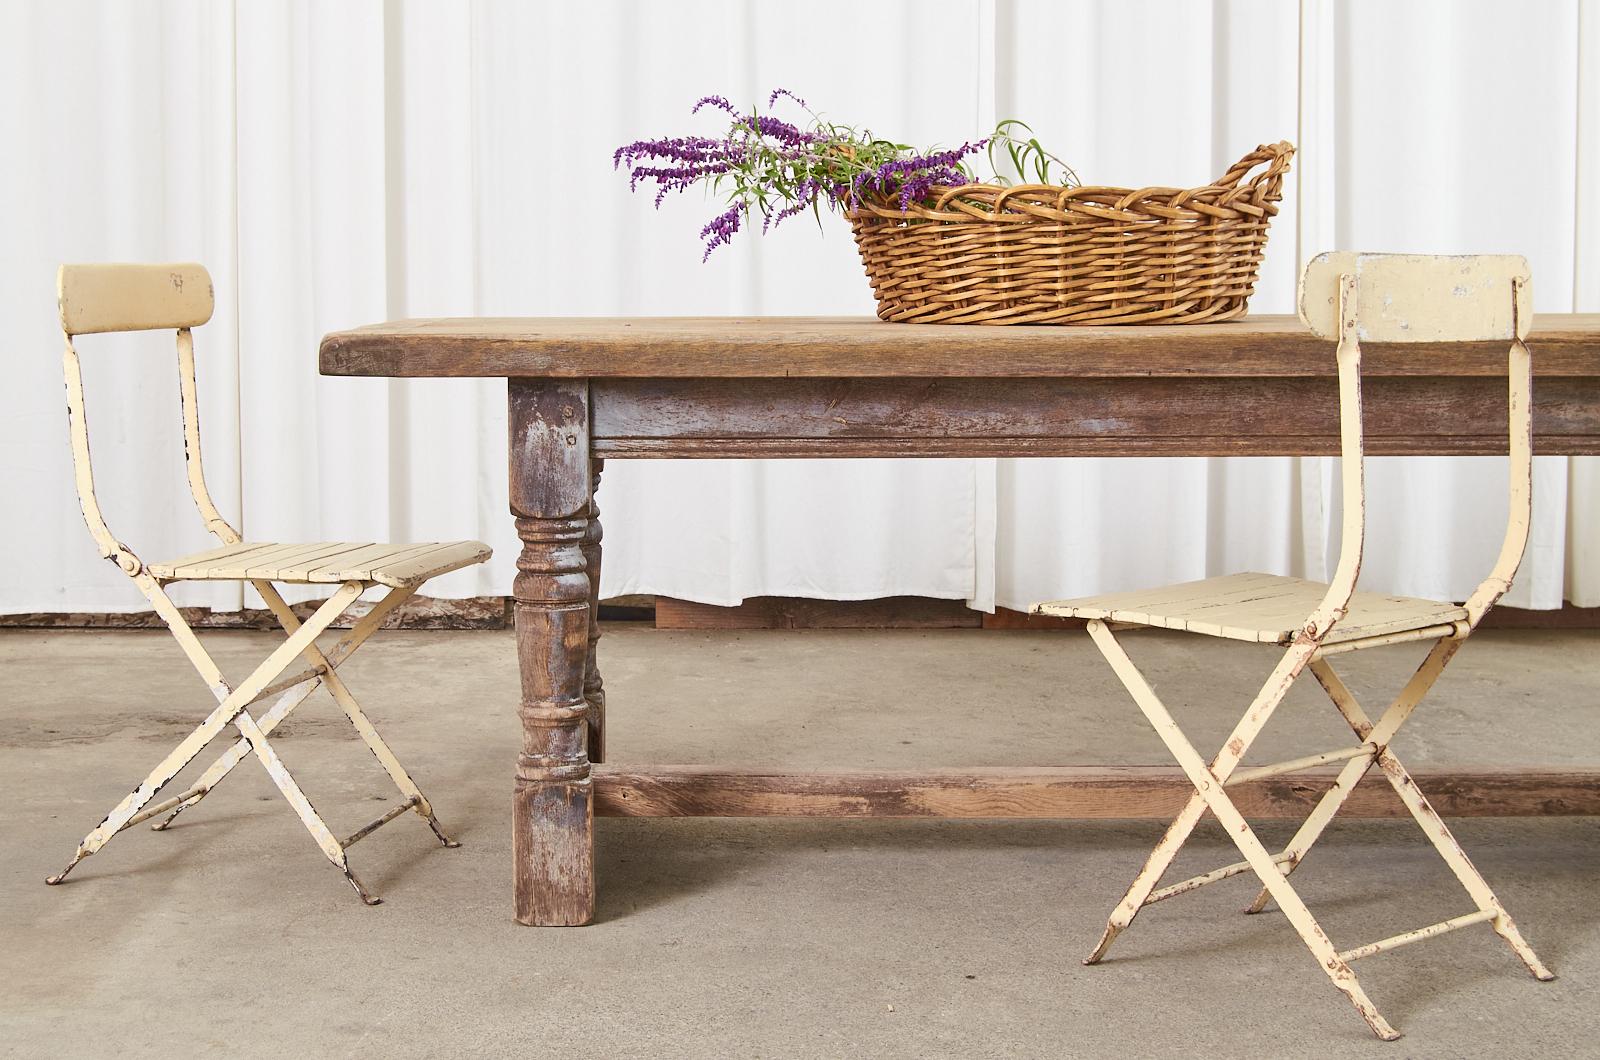 Massive rustic country French farmhouse trestle dining table featuring a beautifully distressed bleached oak finish and patina. The top is crafted from 2 inch thick solid oak planks with breadboard ends and hand-forged iron bolts on the ends. The